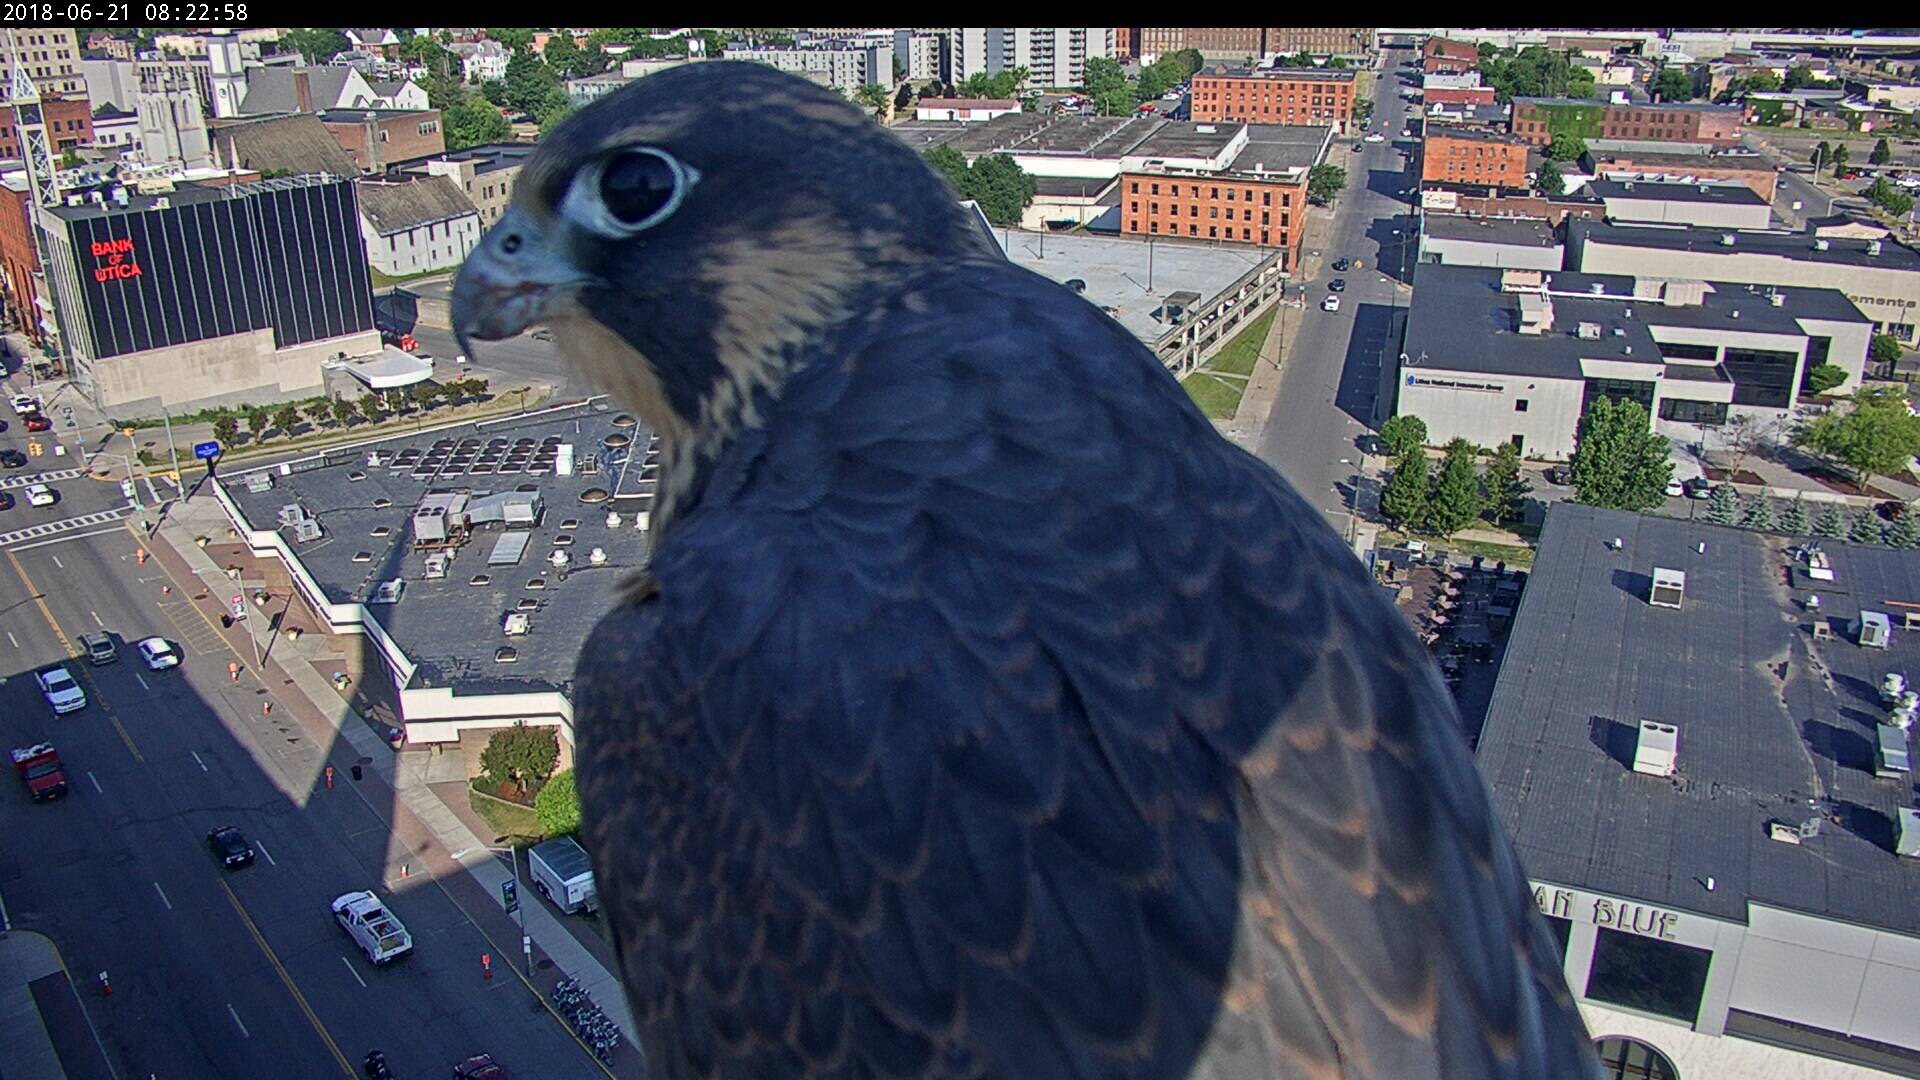 Getting Close to our rooftop camera